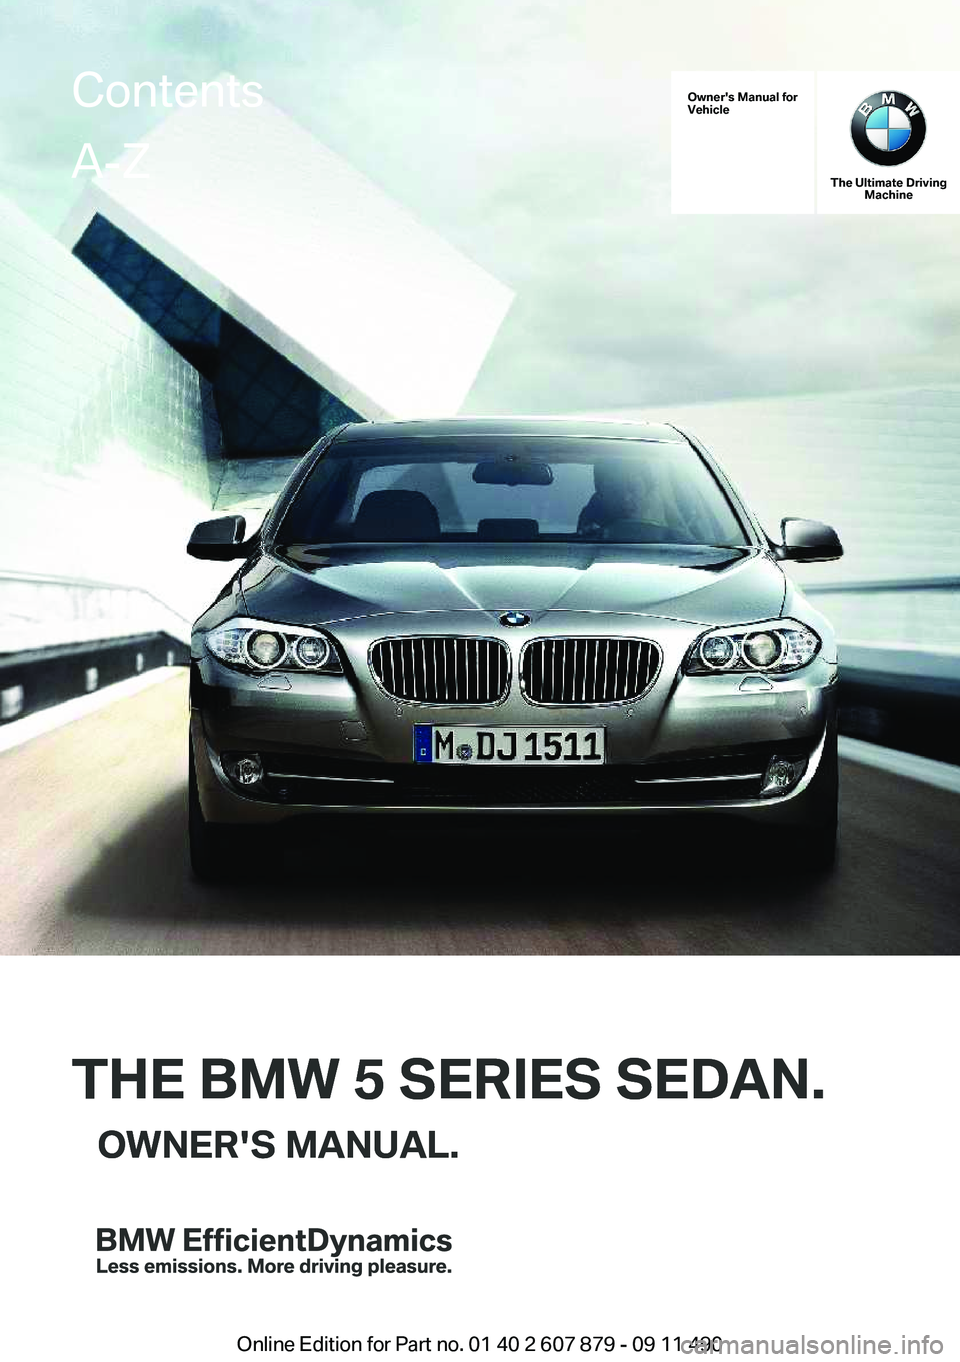 BMW 528I 2012  Owners Manual Owner's Manual for
Vehicle
THE BMW 5 SERIES SEDAN.OWNER'S MANUAL.
The Ultimate Driving Machine
THE BMW 5 SERIES SEDAN.OWNER'S MANUAL.
ContentsA-Z
Online Edition for Part no. 01 40 2 607 87